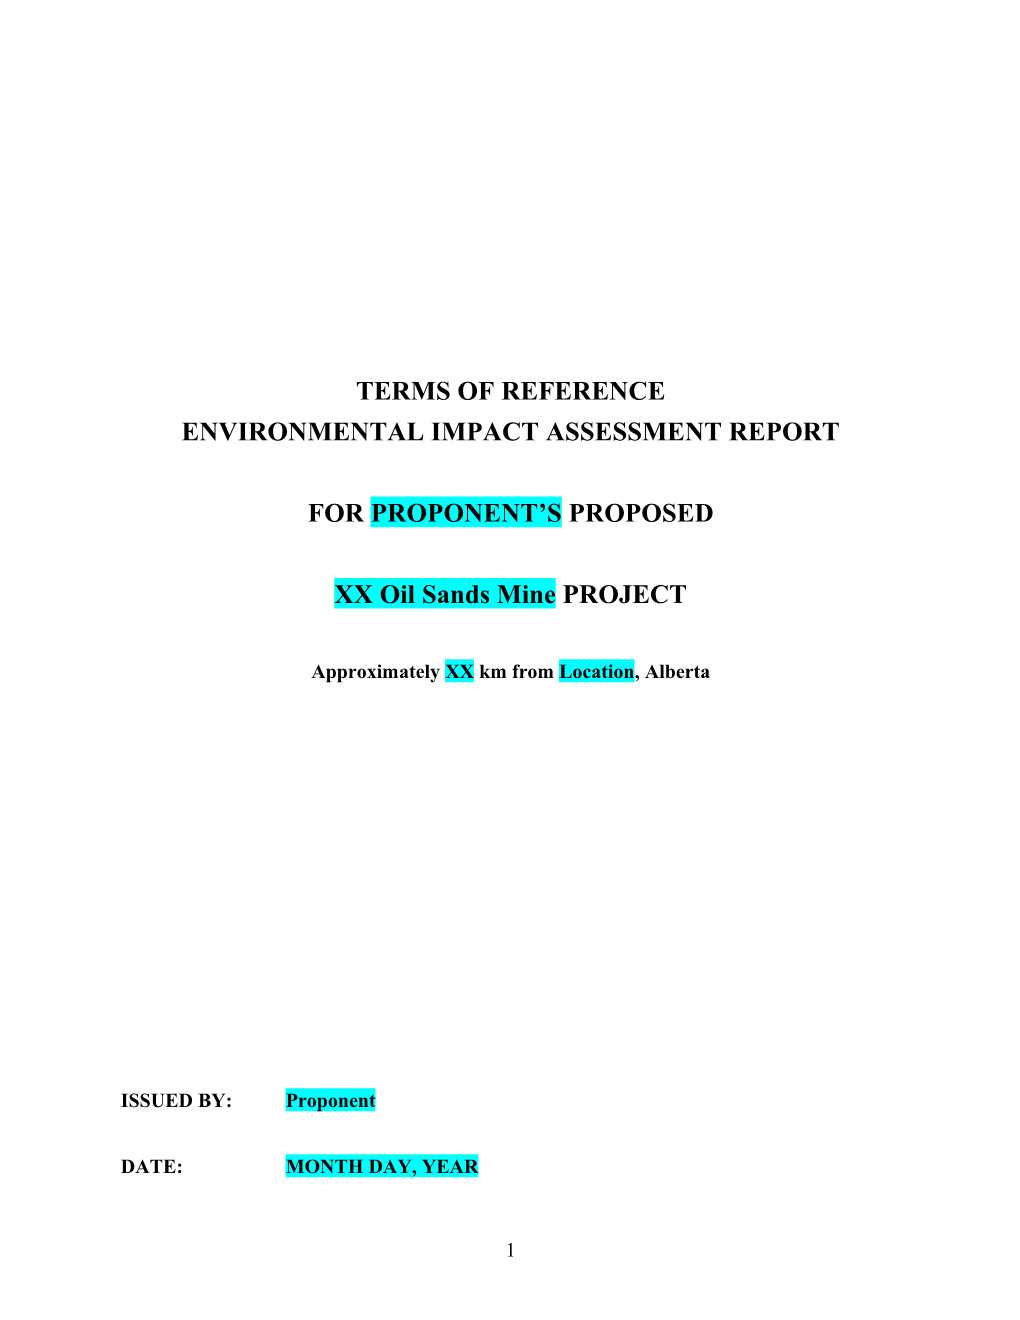 Standardized Terms of Reference